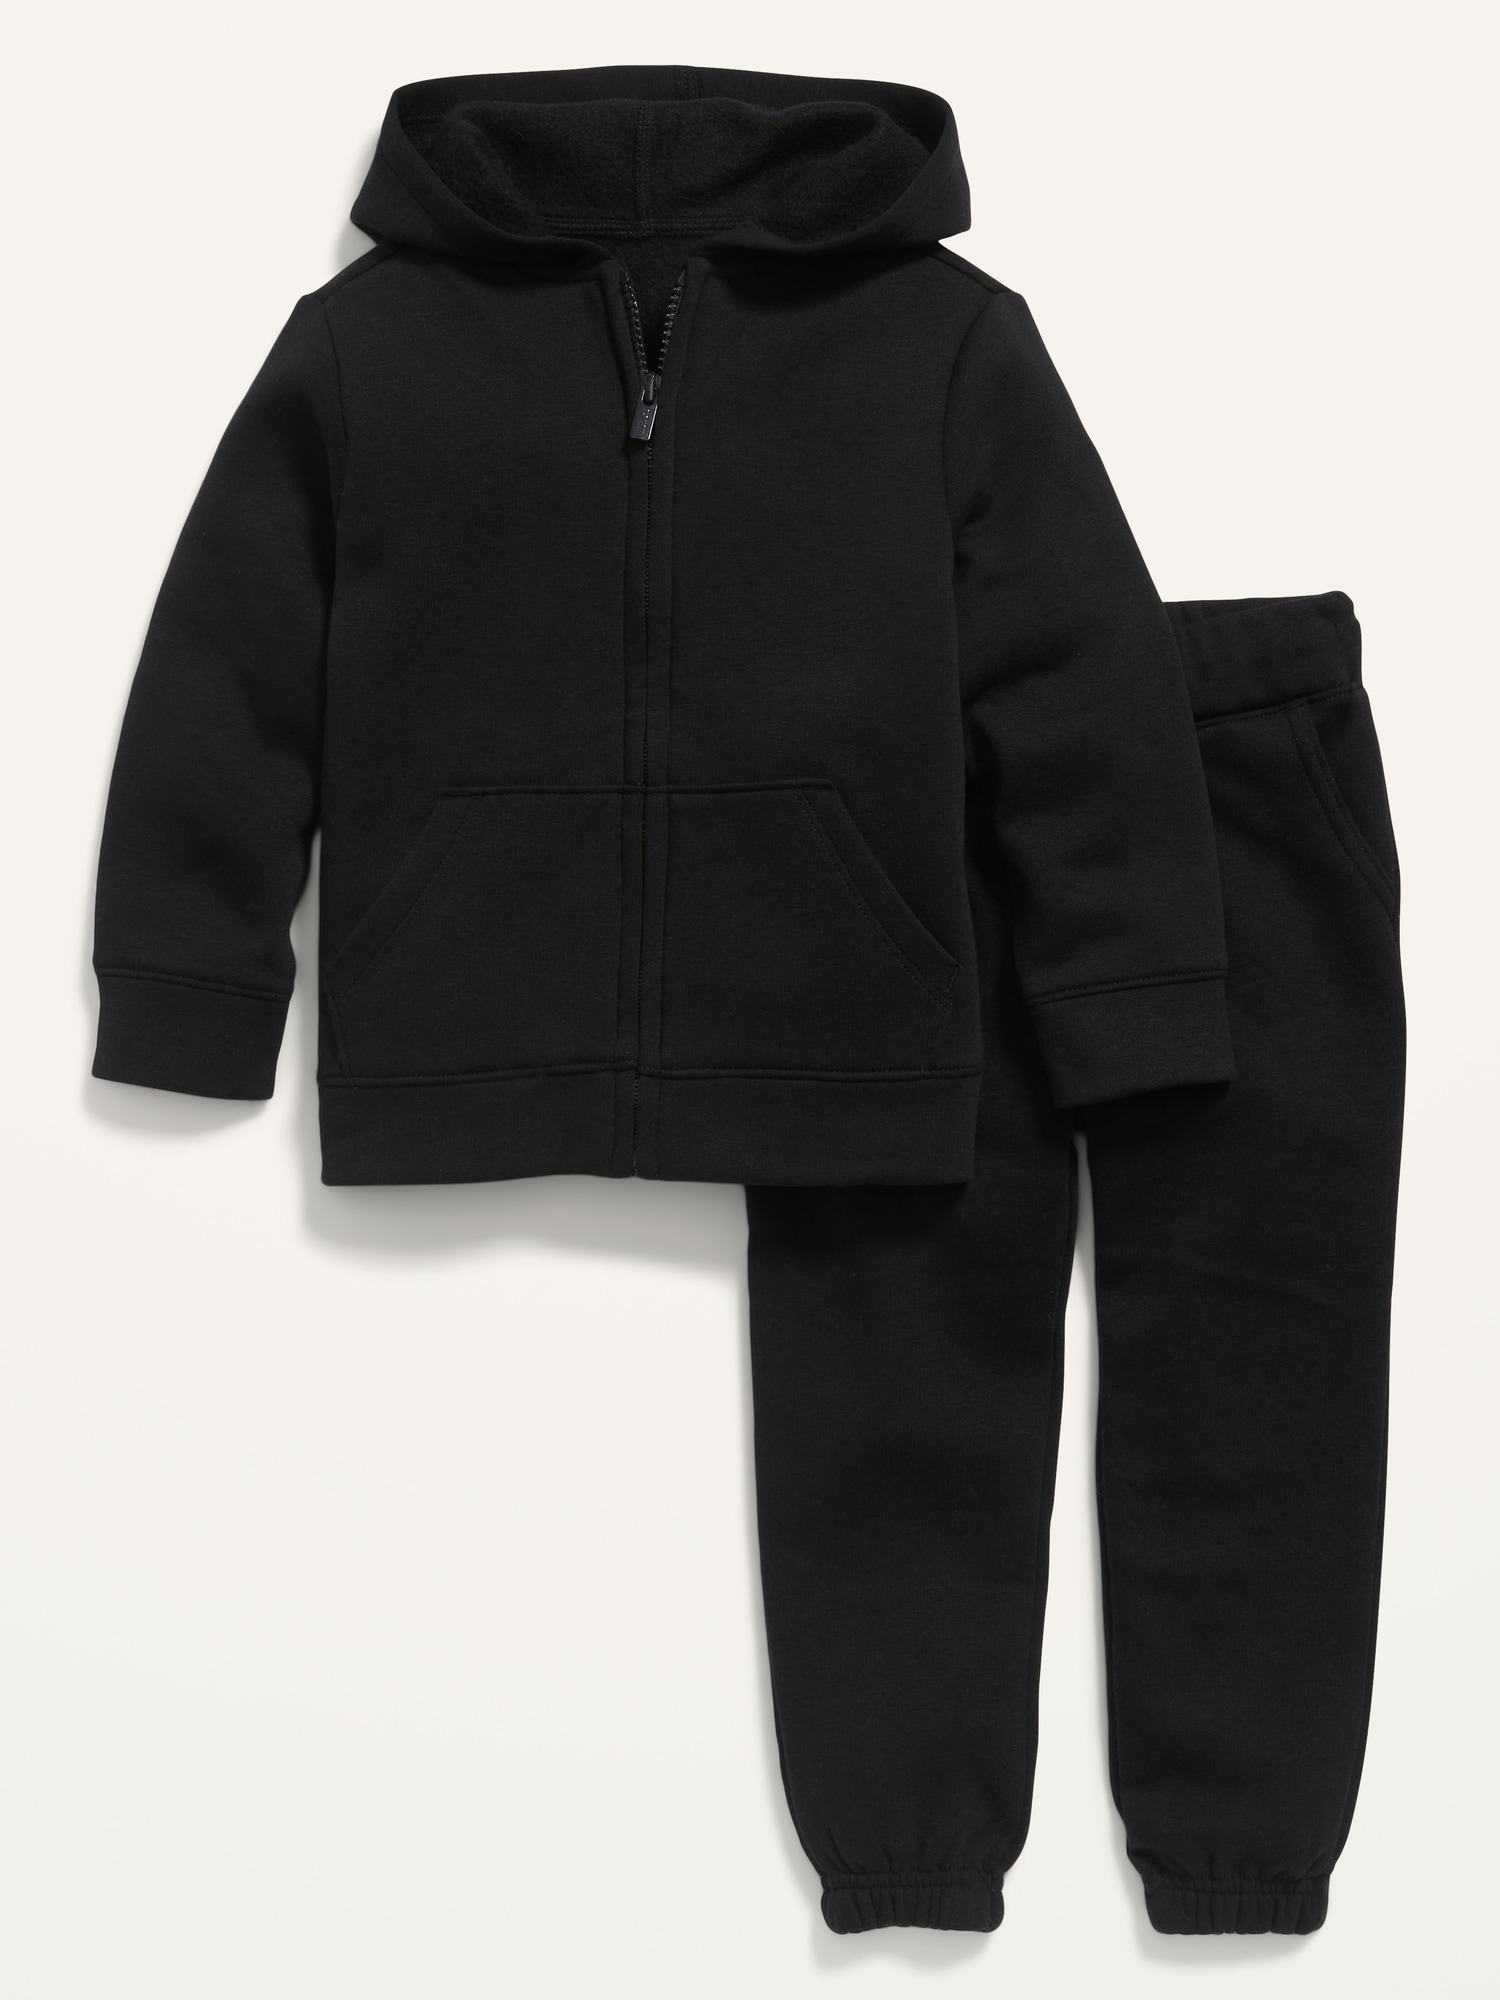 Old Navy Unisex Zip Hoodie and Functional Drawstring Jogger Sweatpants Set for Toddler black. 1